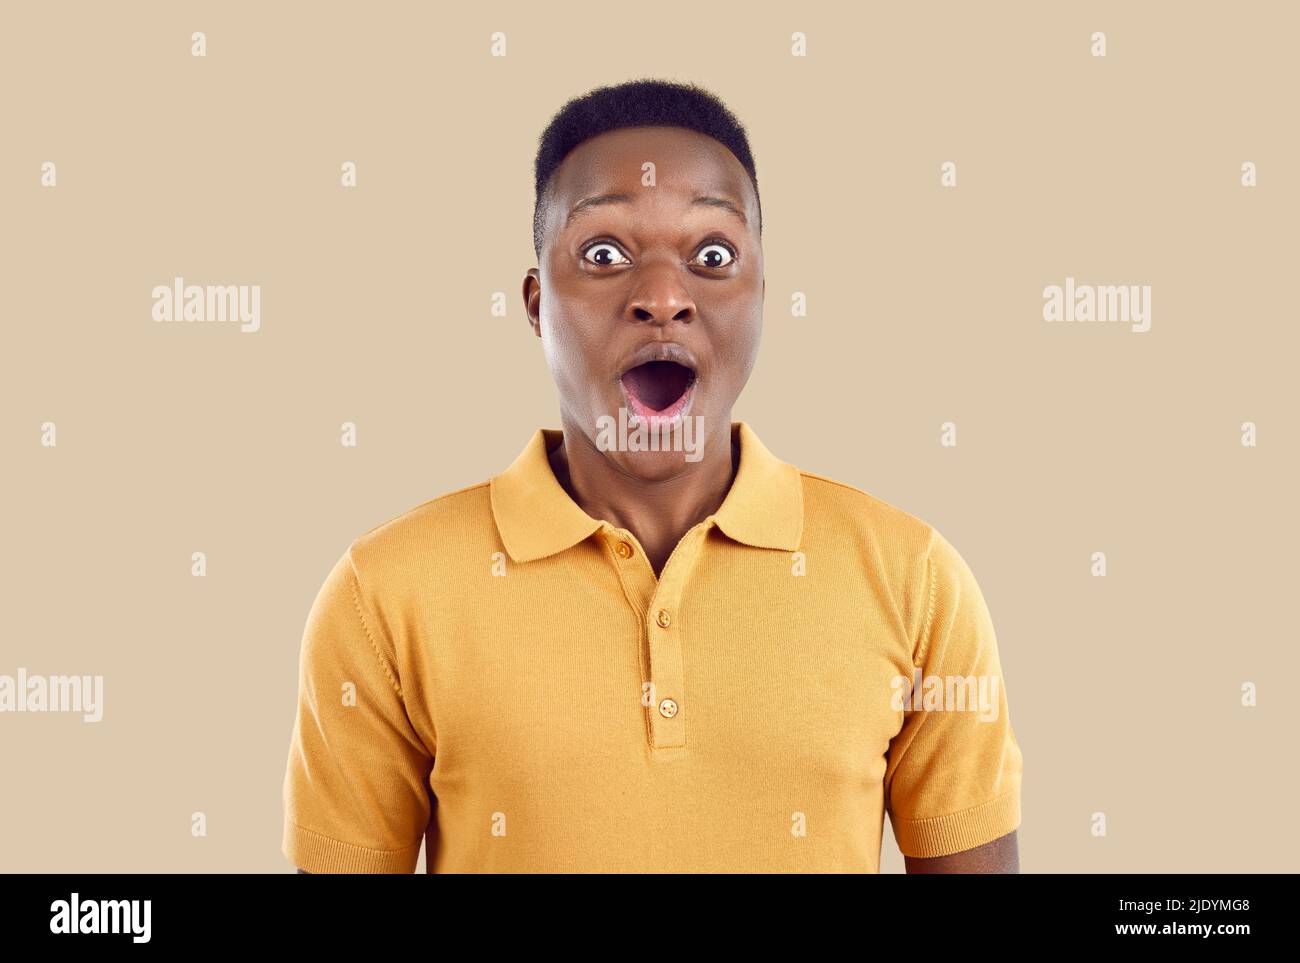 Amazed Frican American man looks at camera with shocked expression on beige background. Stock Photo